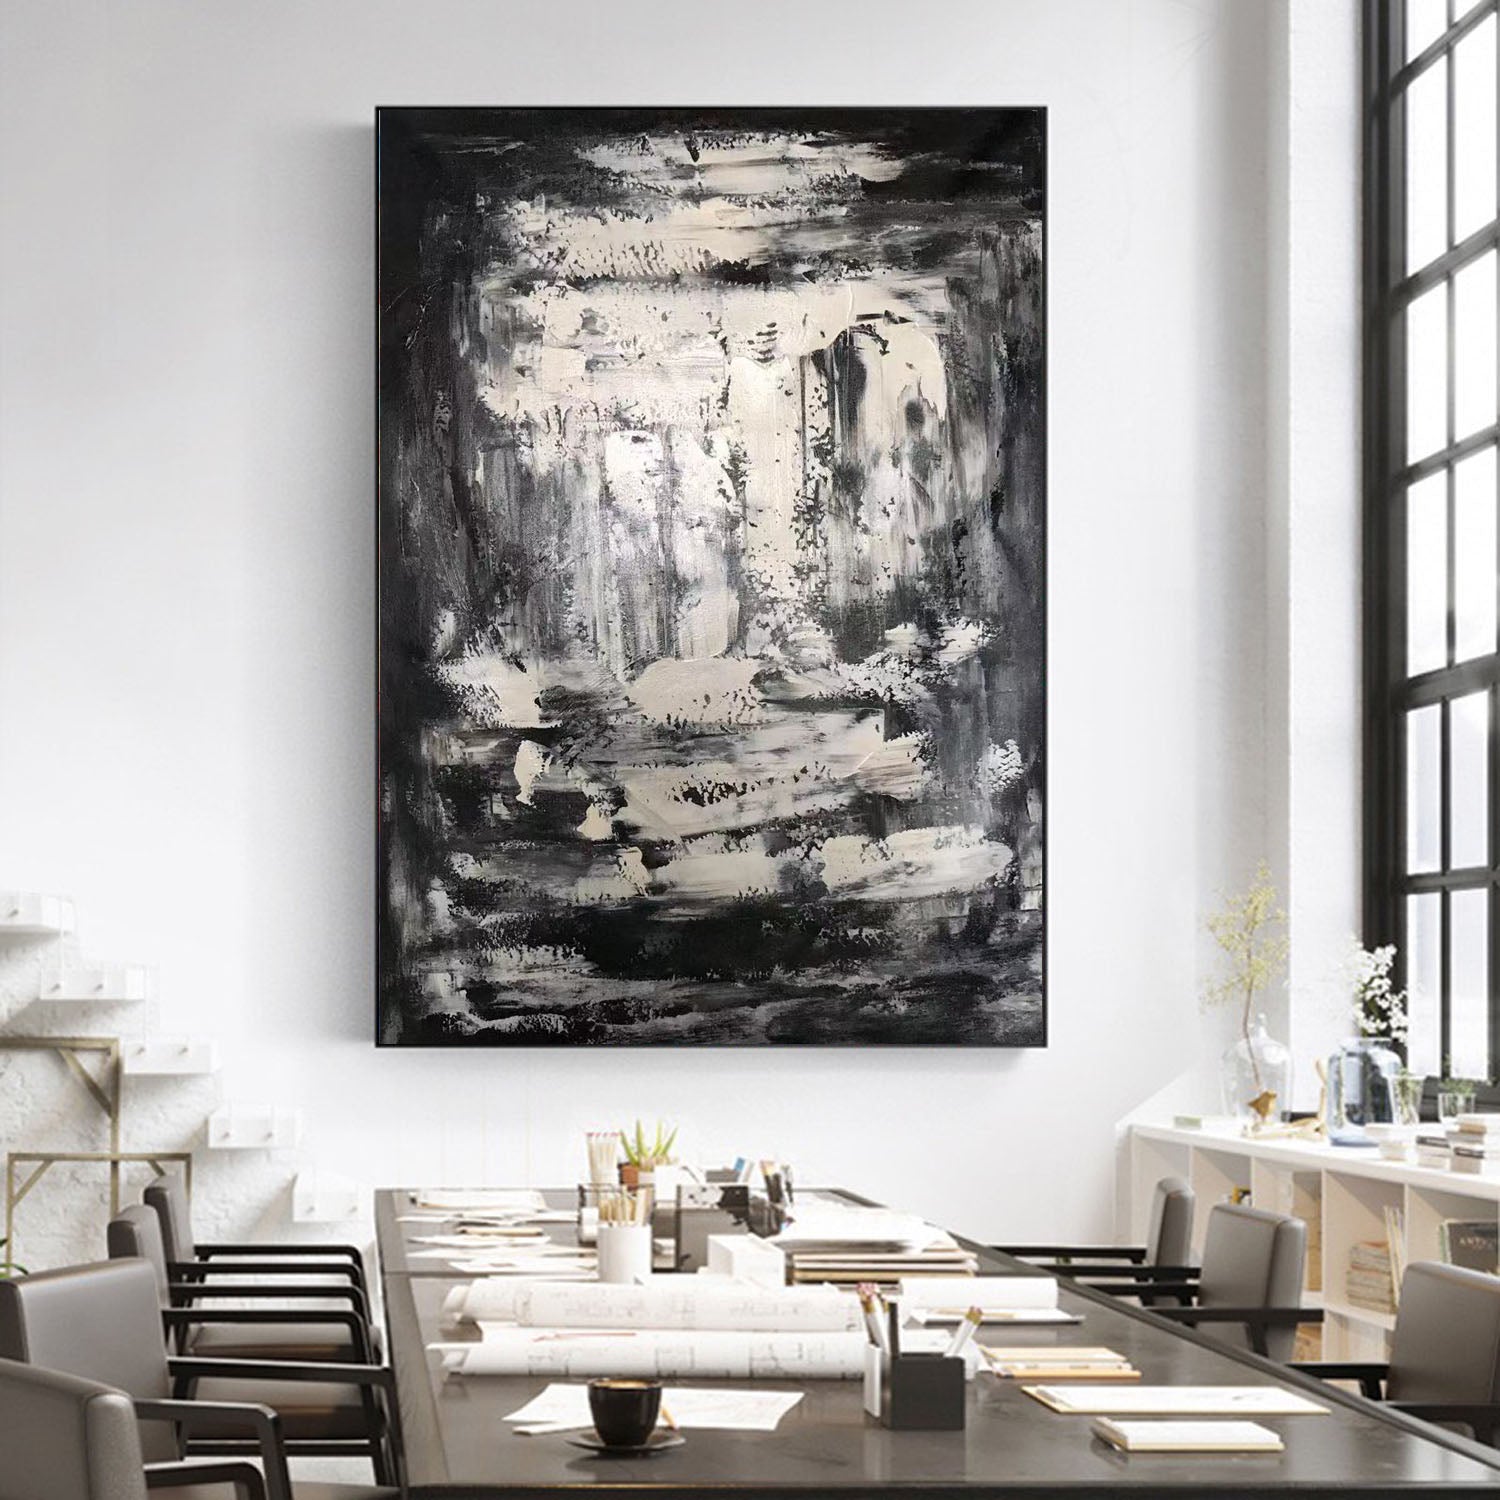 Large black and white art  Black and white abstract art on canvas –  LargeArtCanvas